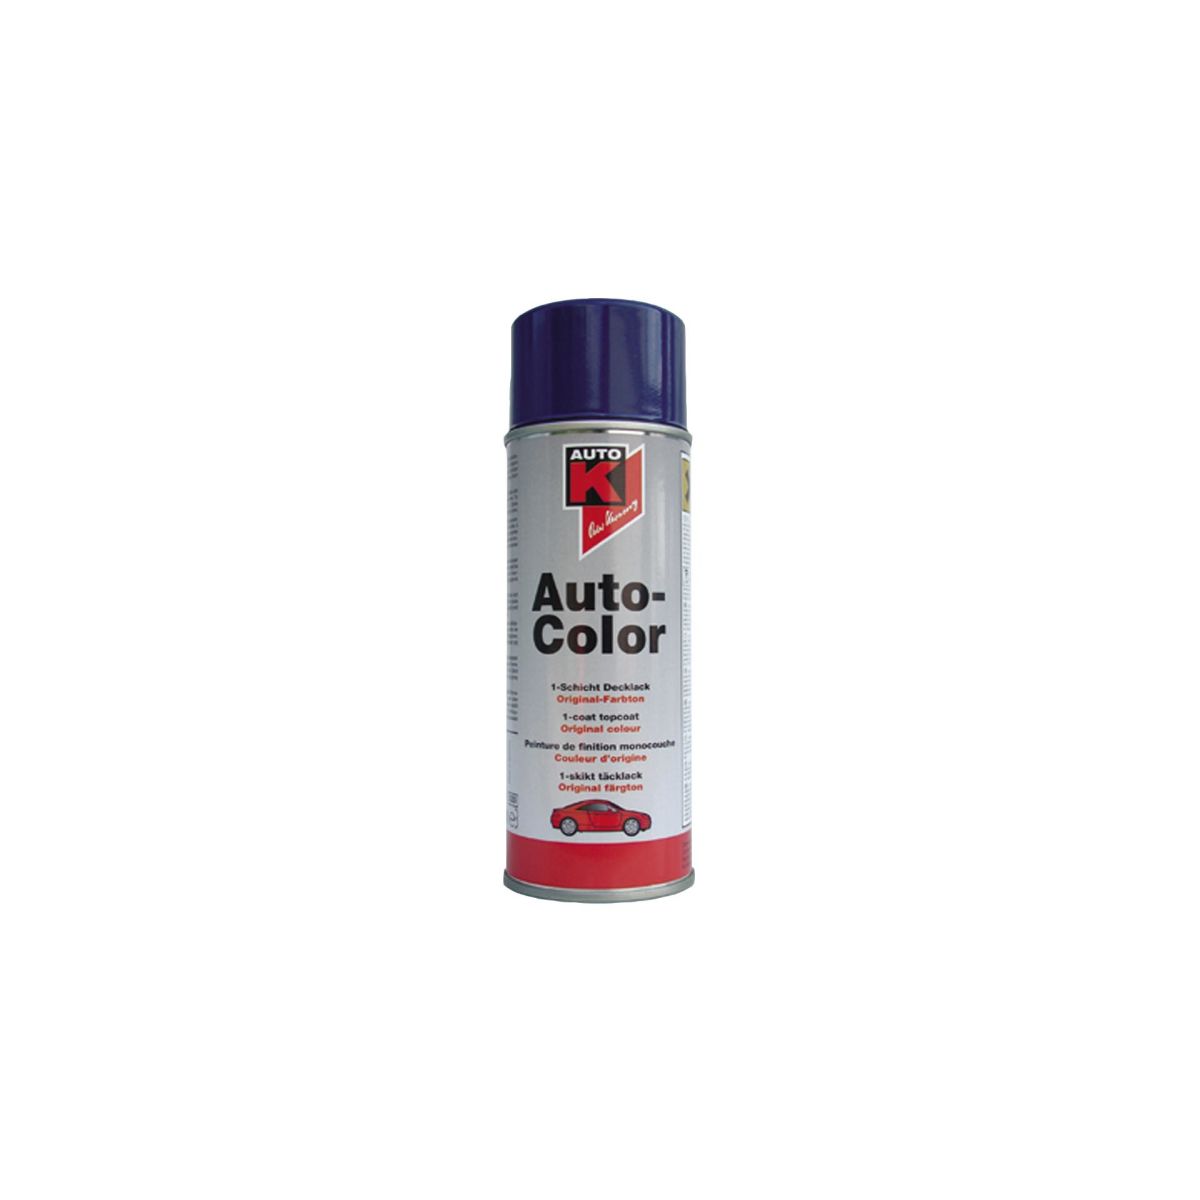 Auto-K-Color is ideally suited for larger...